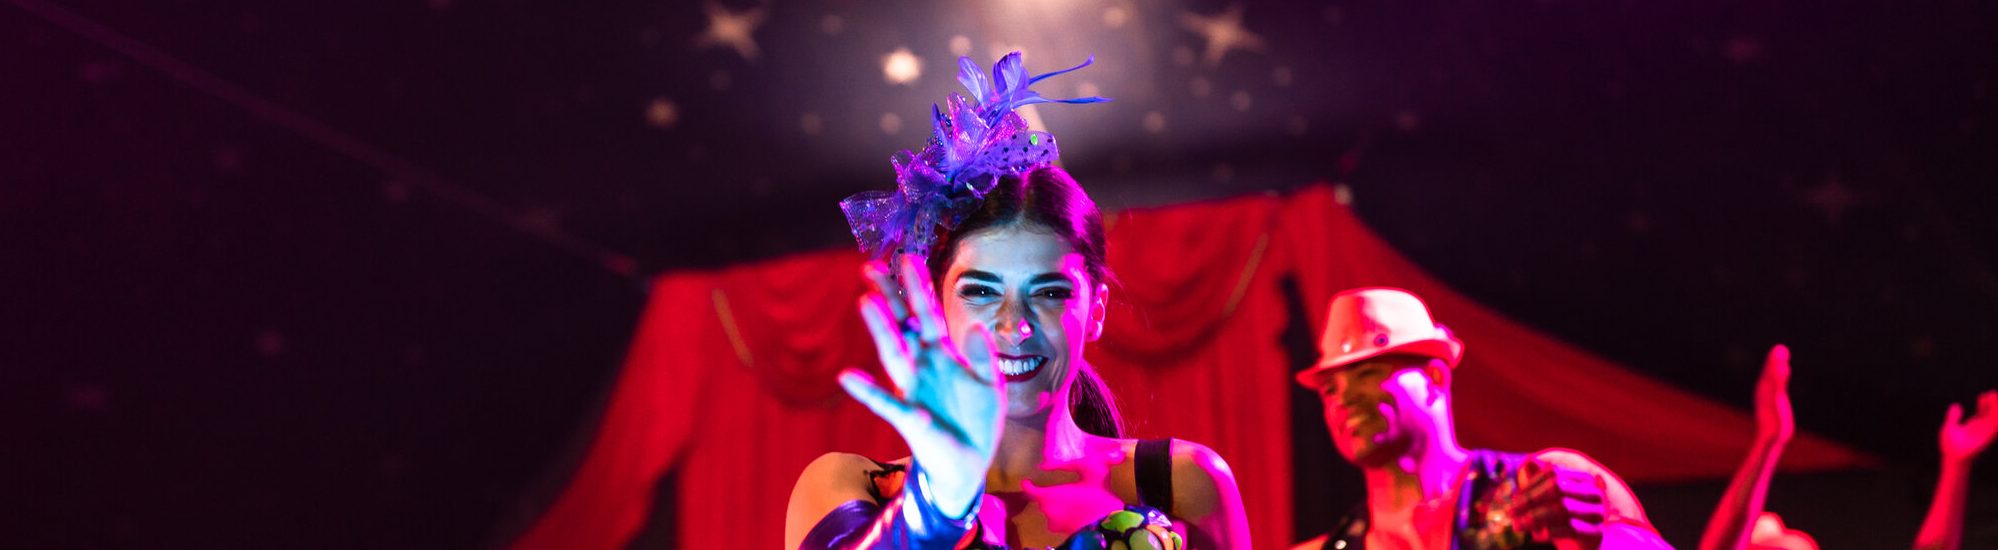 A dancer with brown hair waves at the camera. You can see the circus curtains in the background.